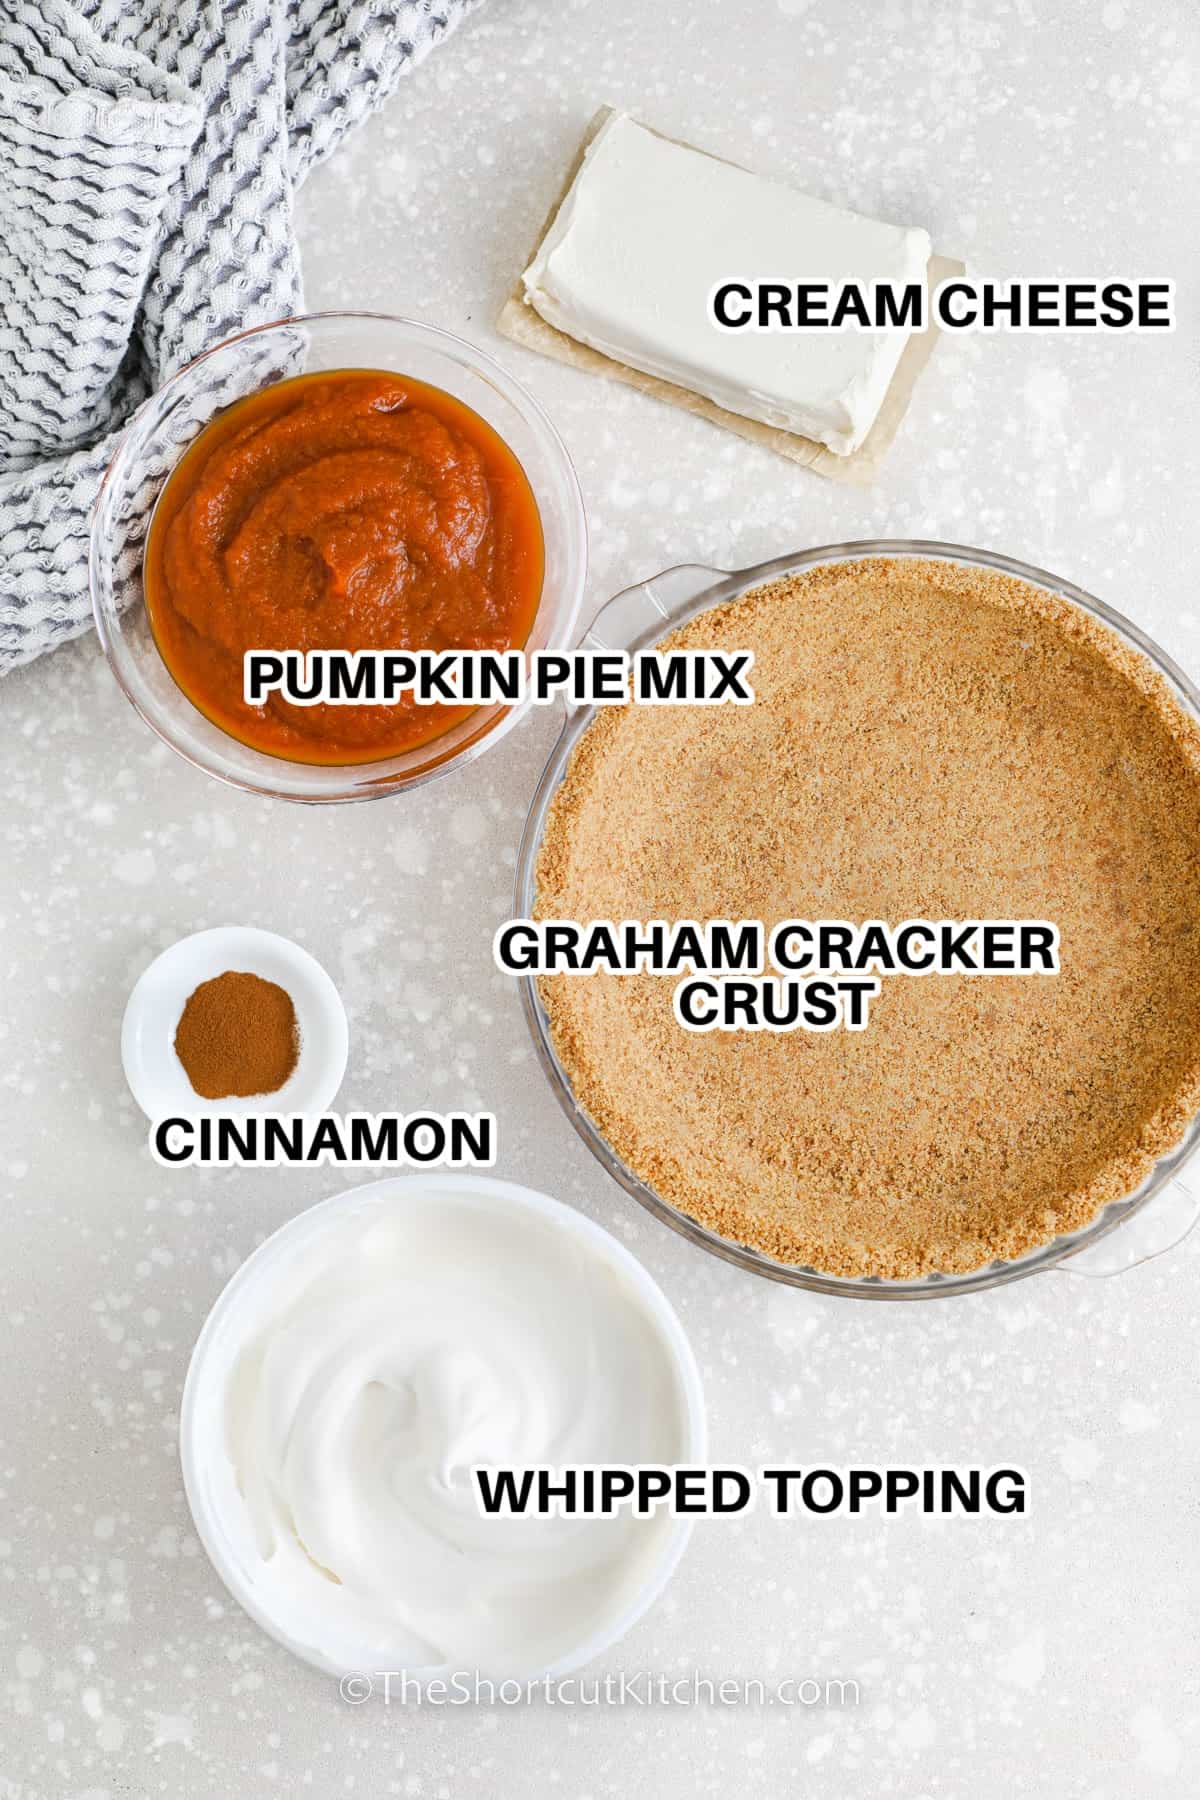 Ingredients to make a no bake pumpkin pie labeled: pumpkin pie mix, cream cheese, graham cracker crust, cinnamon, whipped topping